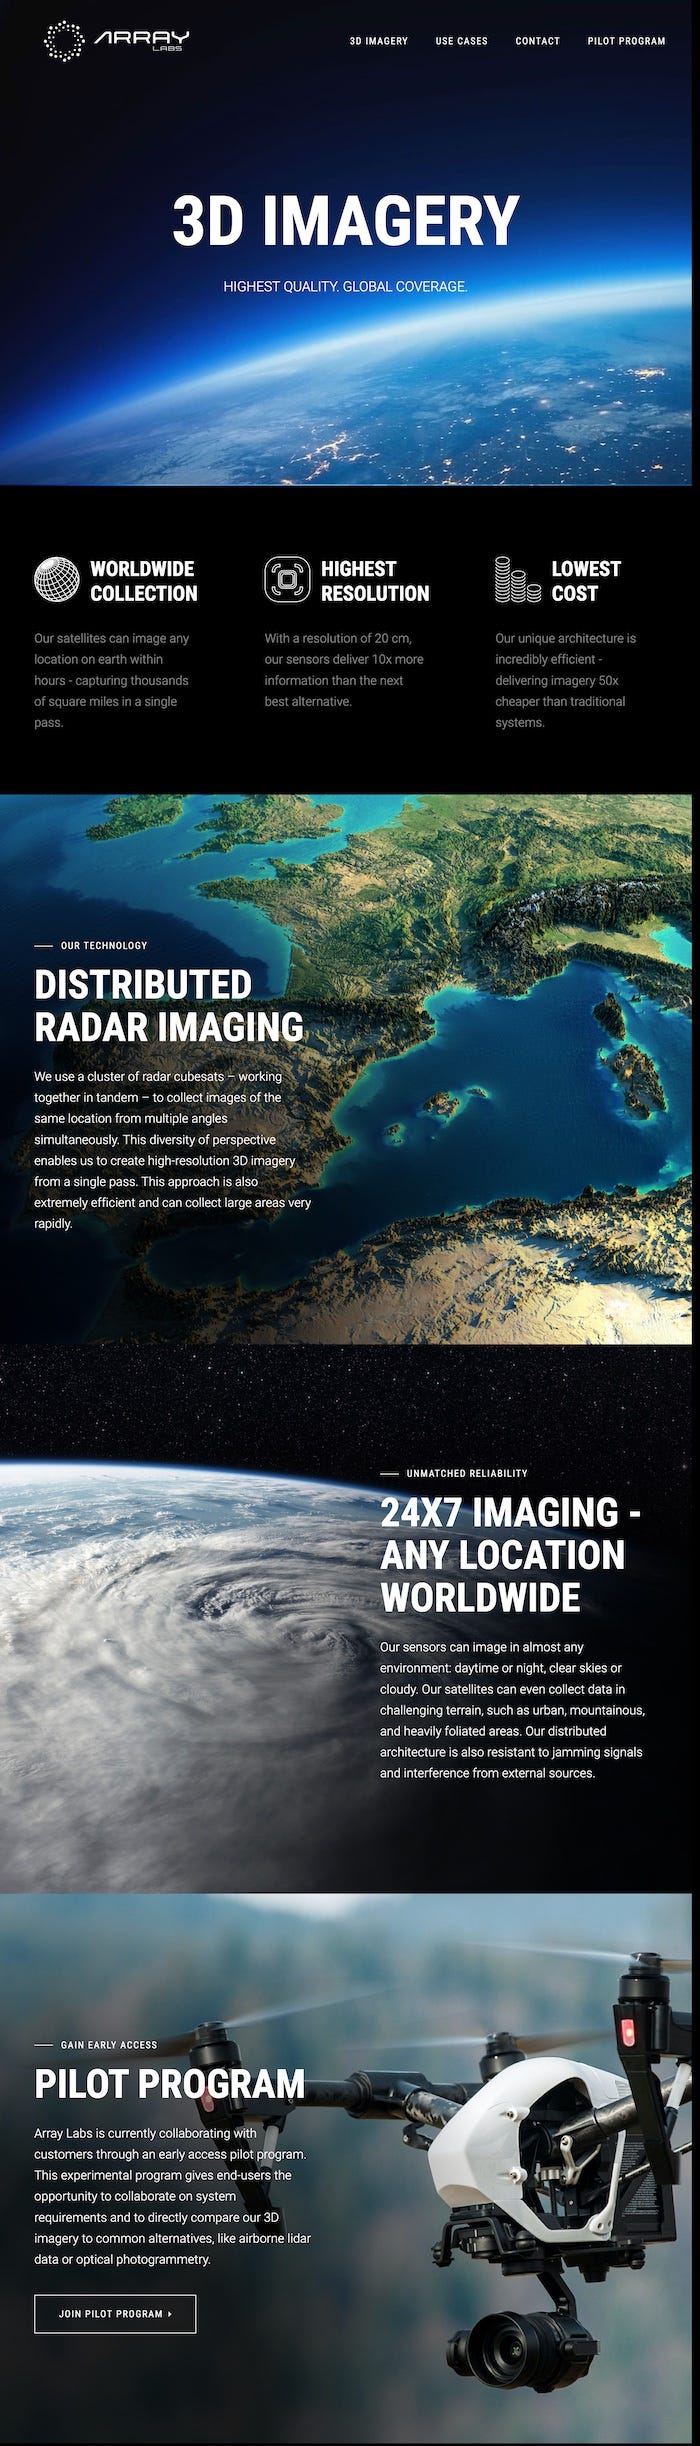 Array Labs - 3d imaging from space